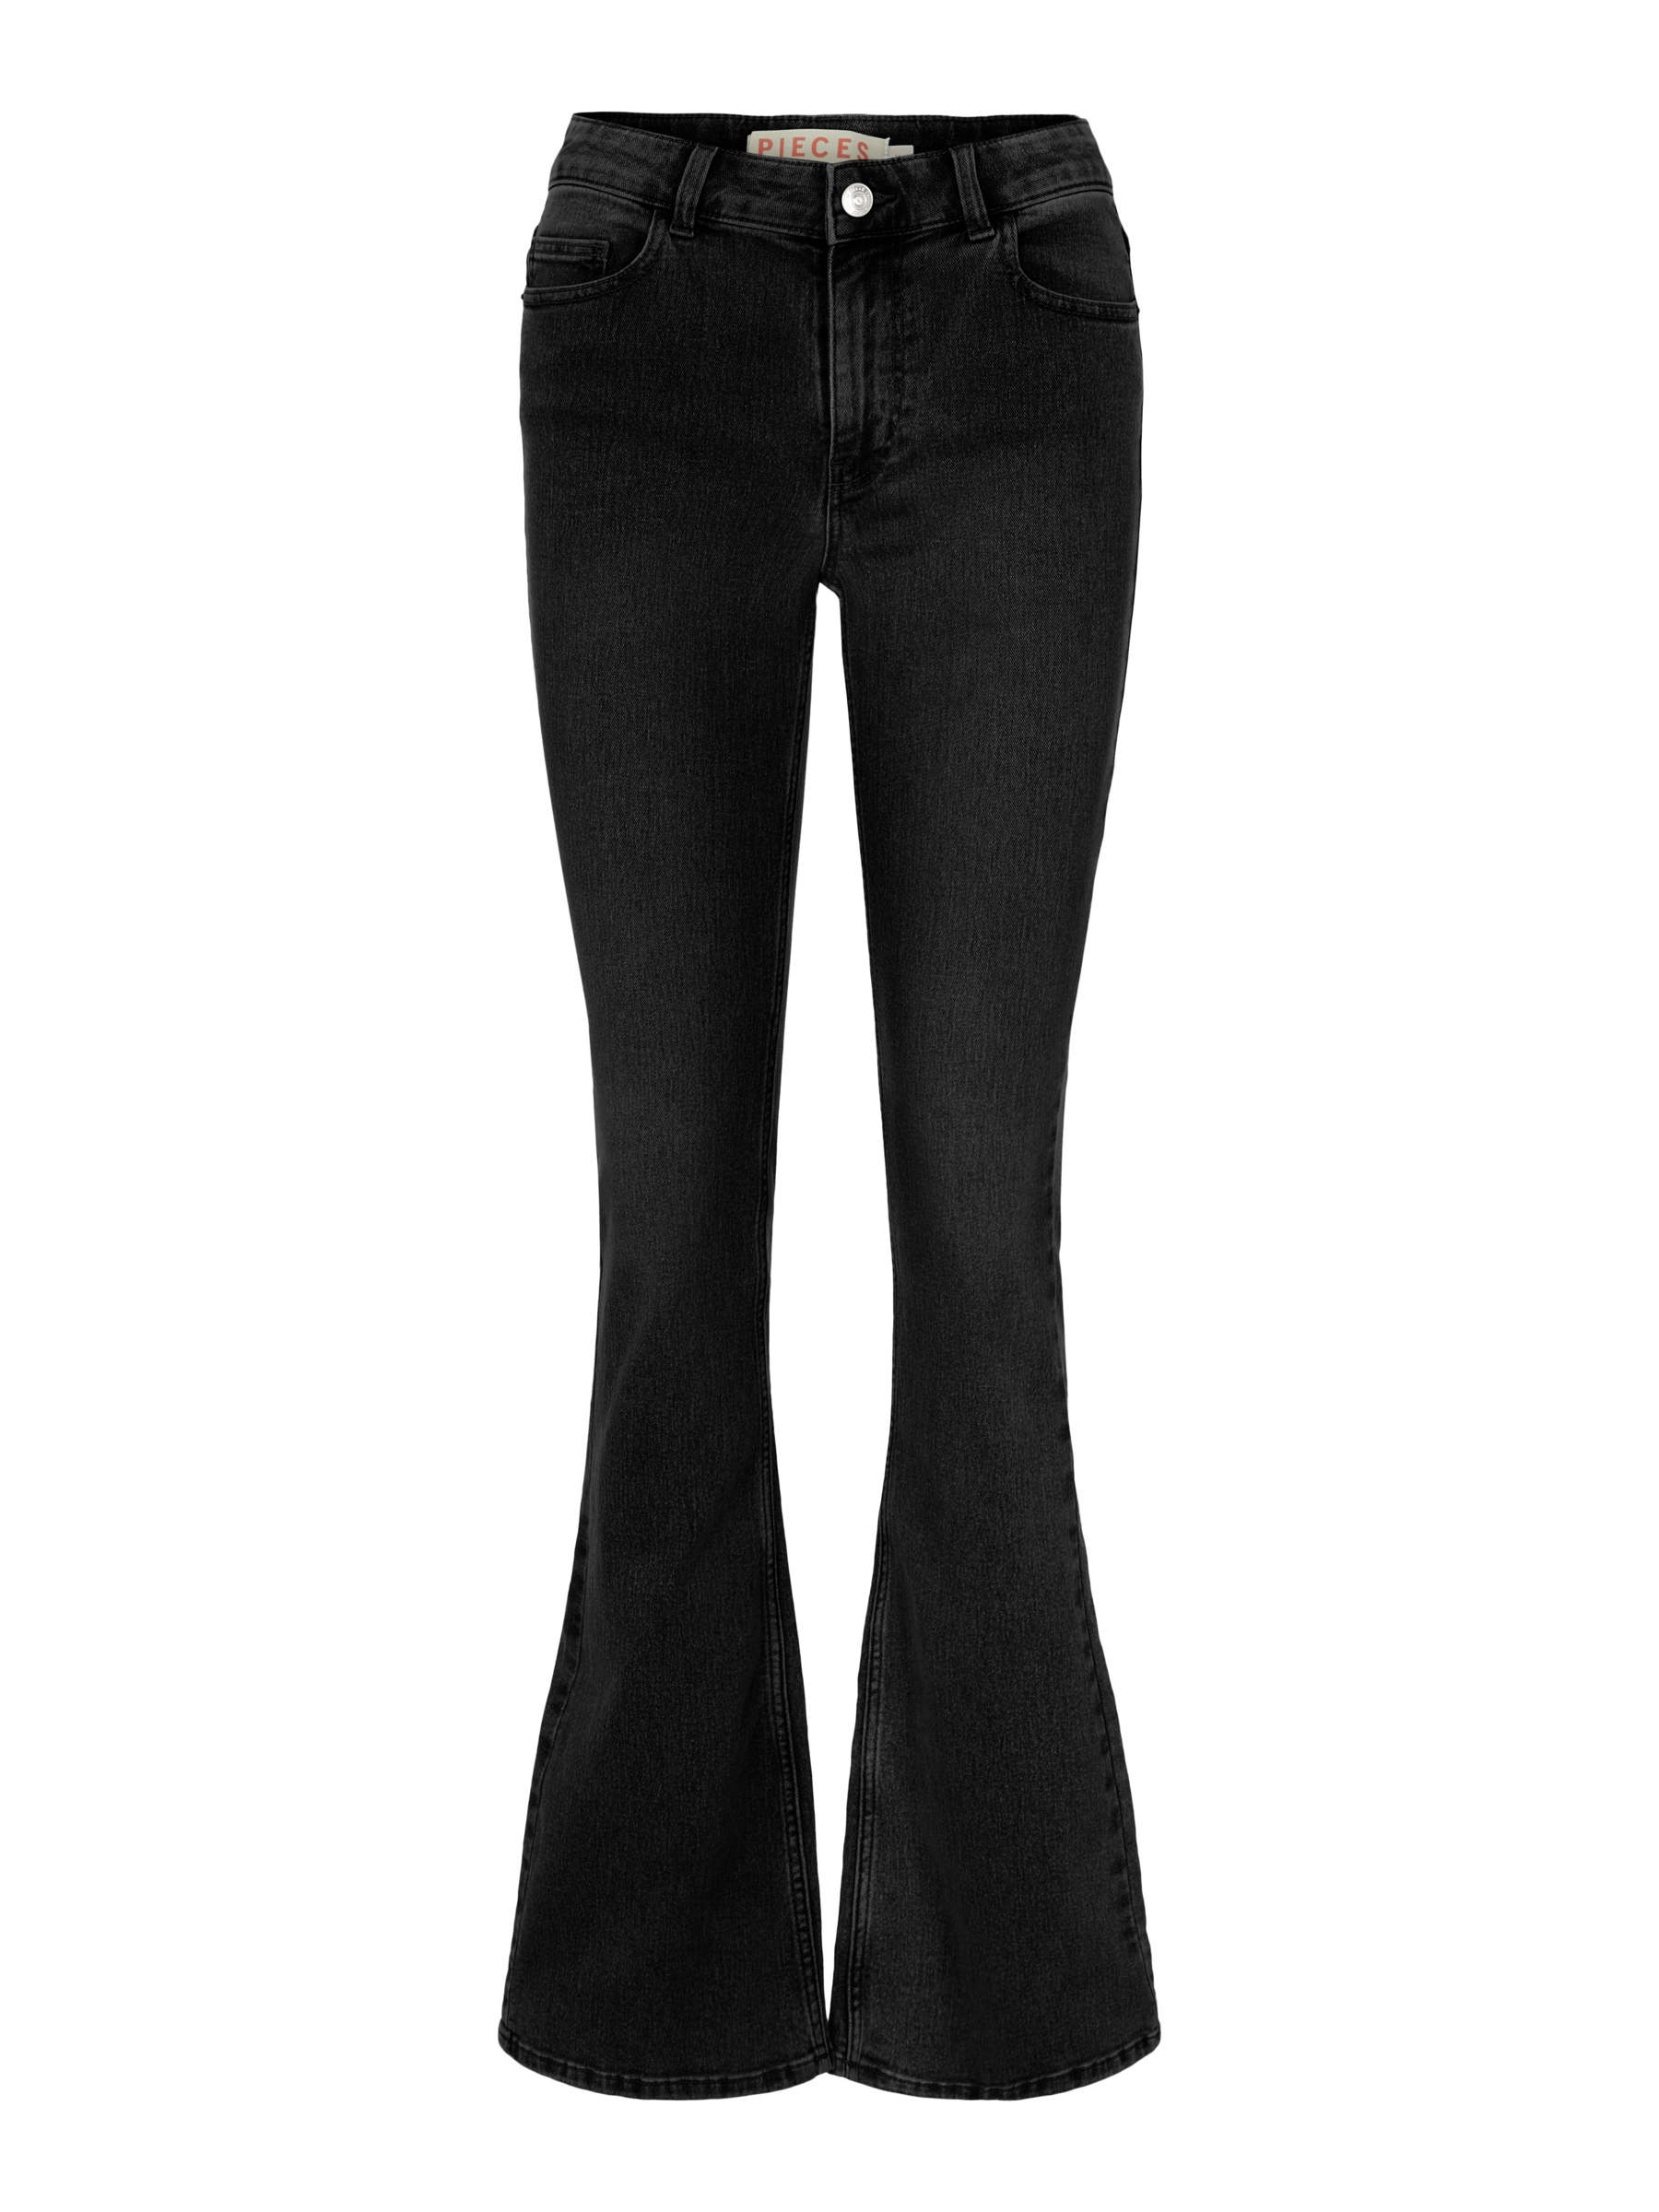 Pcpeggy petite flared jeans | Pieces